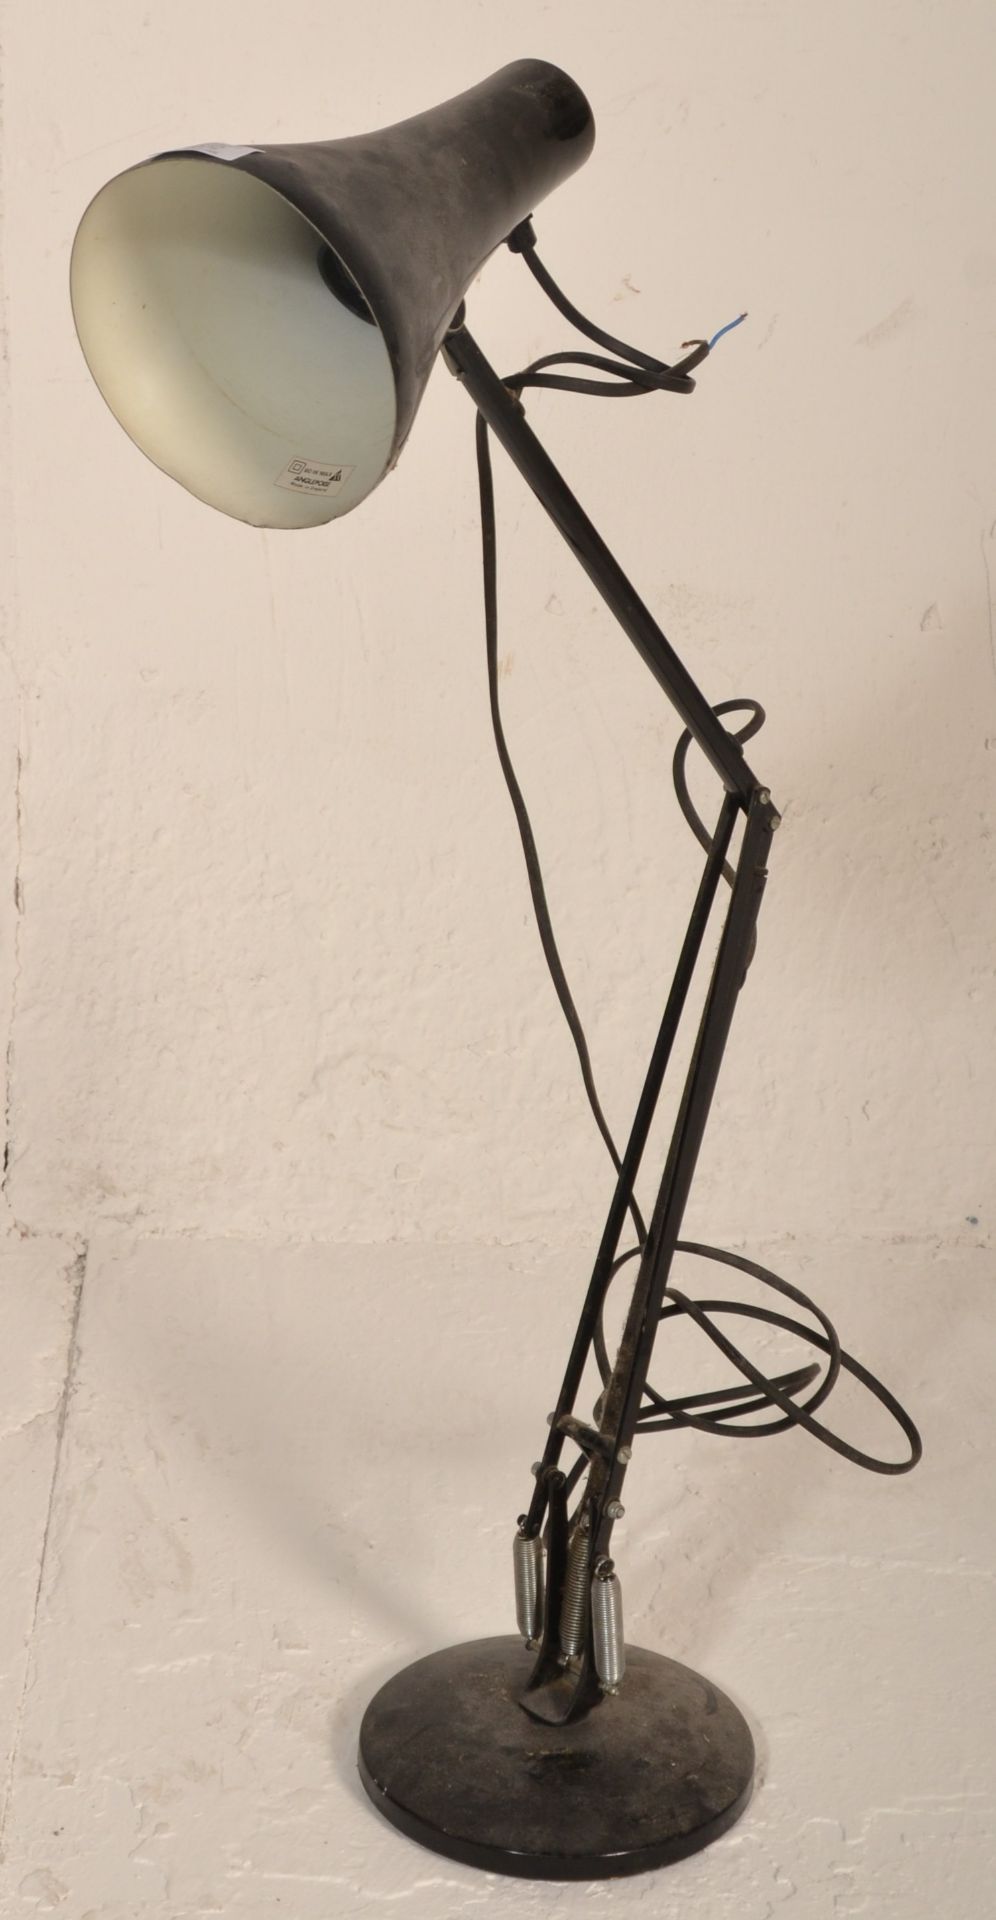 A vintage 20th Century Herbert Terry Anglepoise industrial desk lamp finished in black enamel